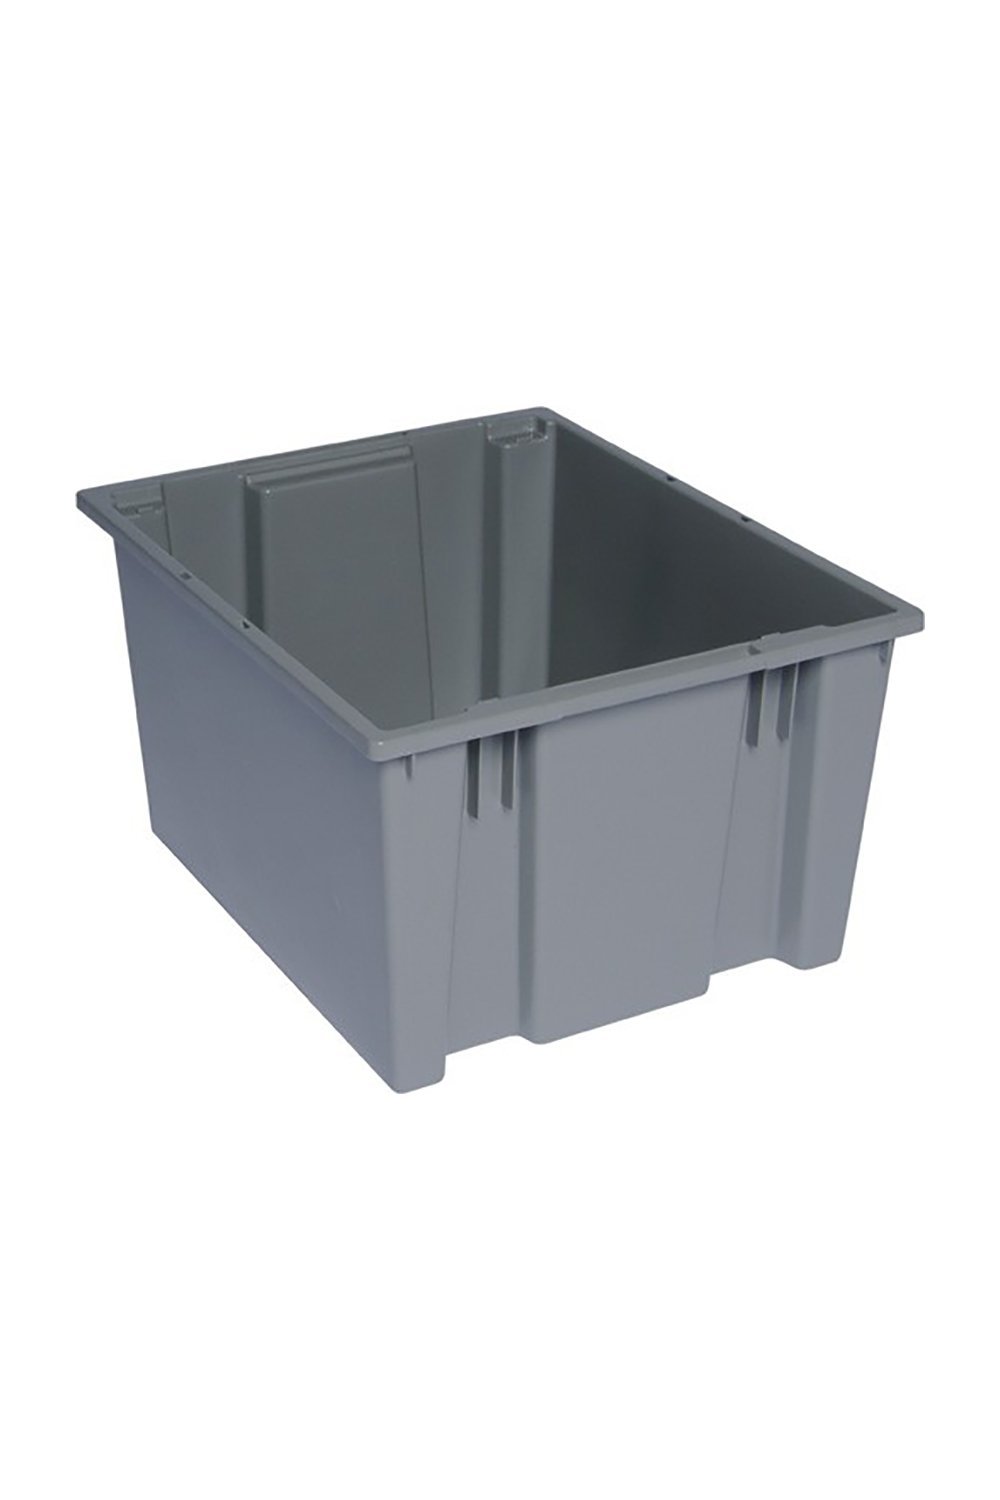 Stack and Nest Tote Bins & Containers Acart 19-1/2"L x 15-1/2"W x 13"H Gray 